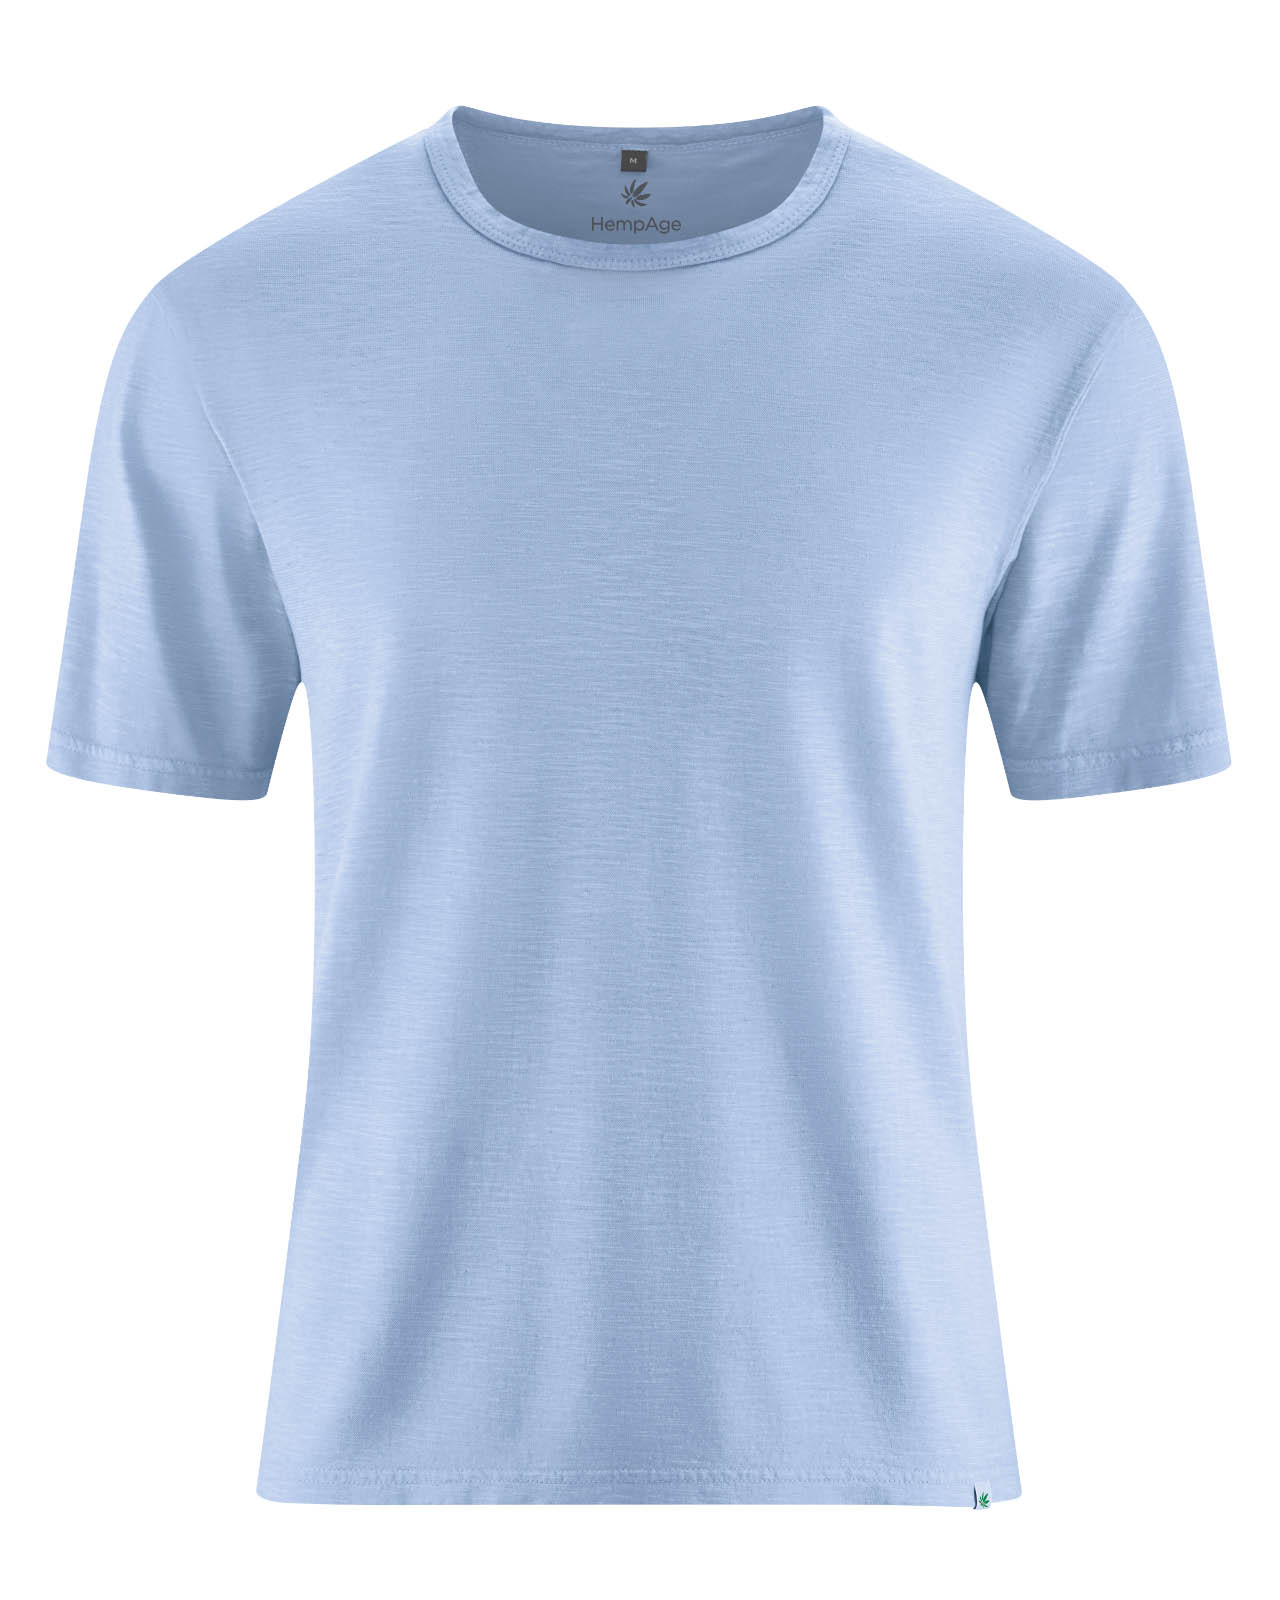 t-shirt-commerce-equitable_DH846_water